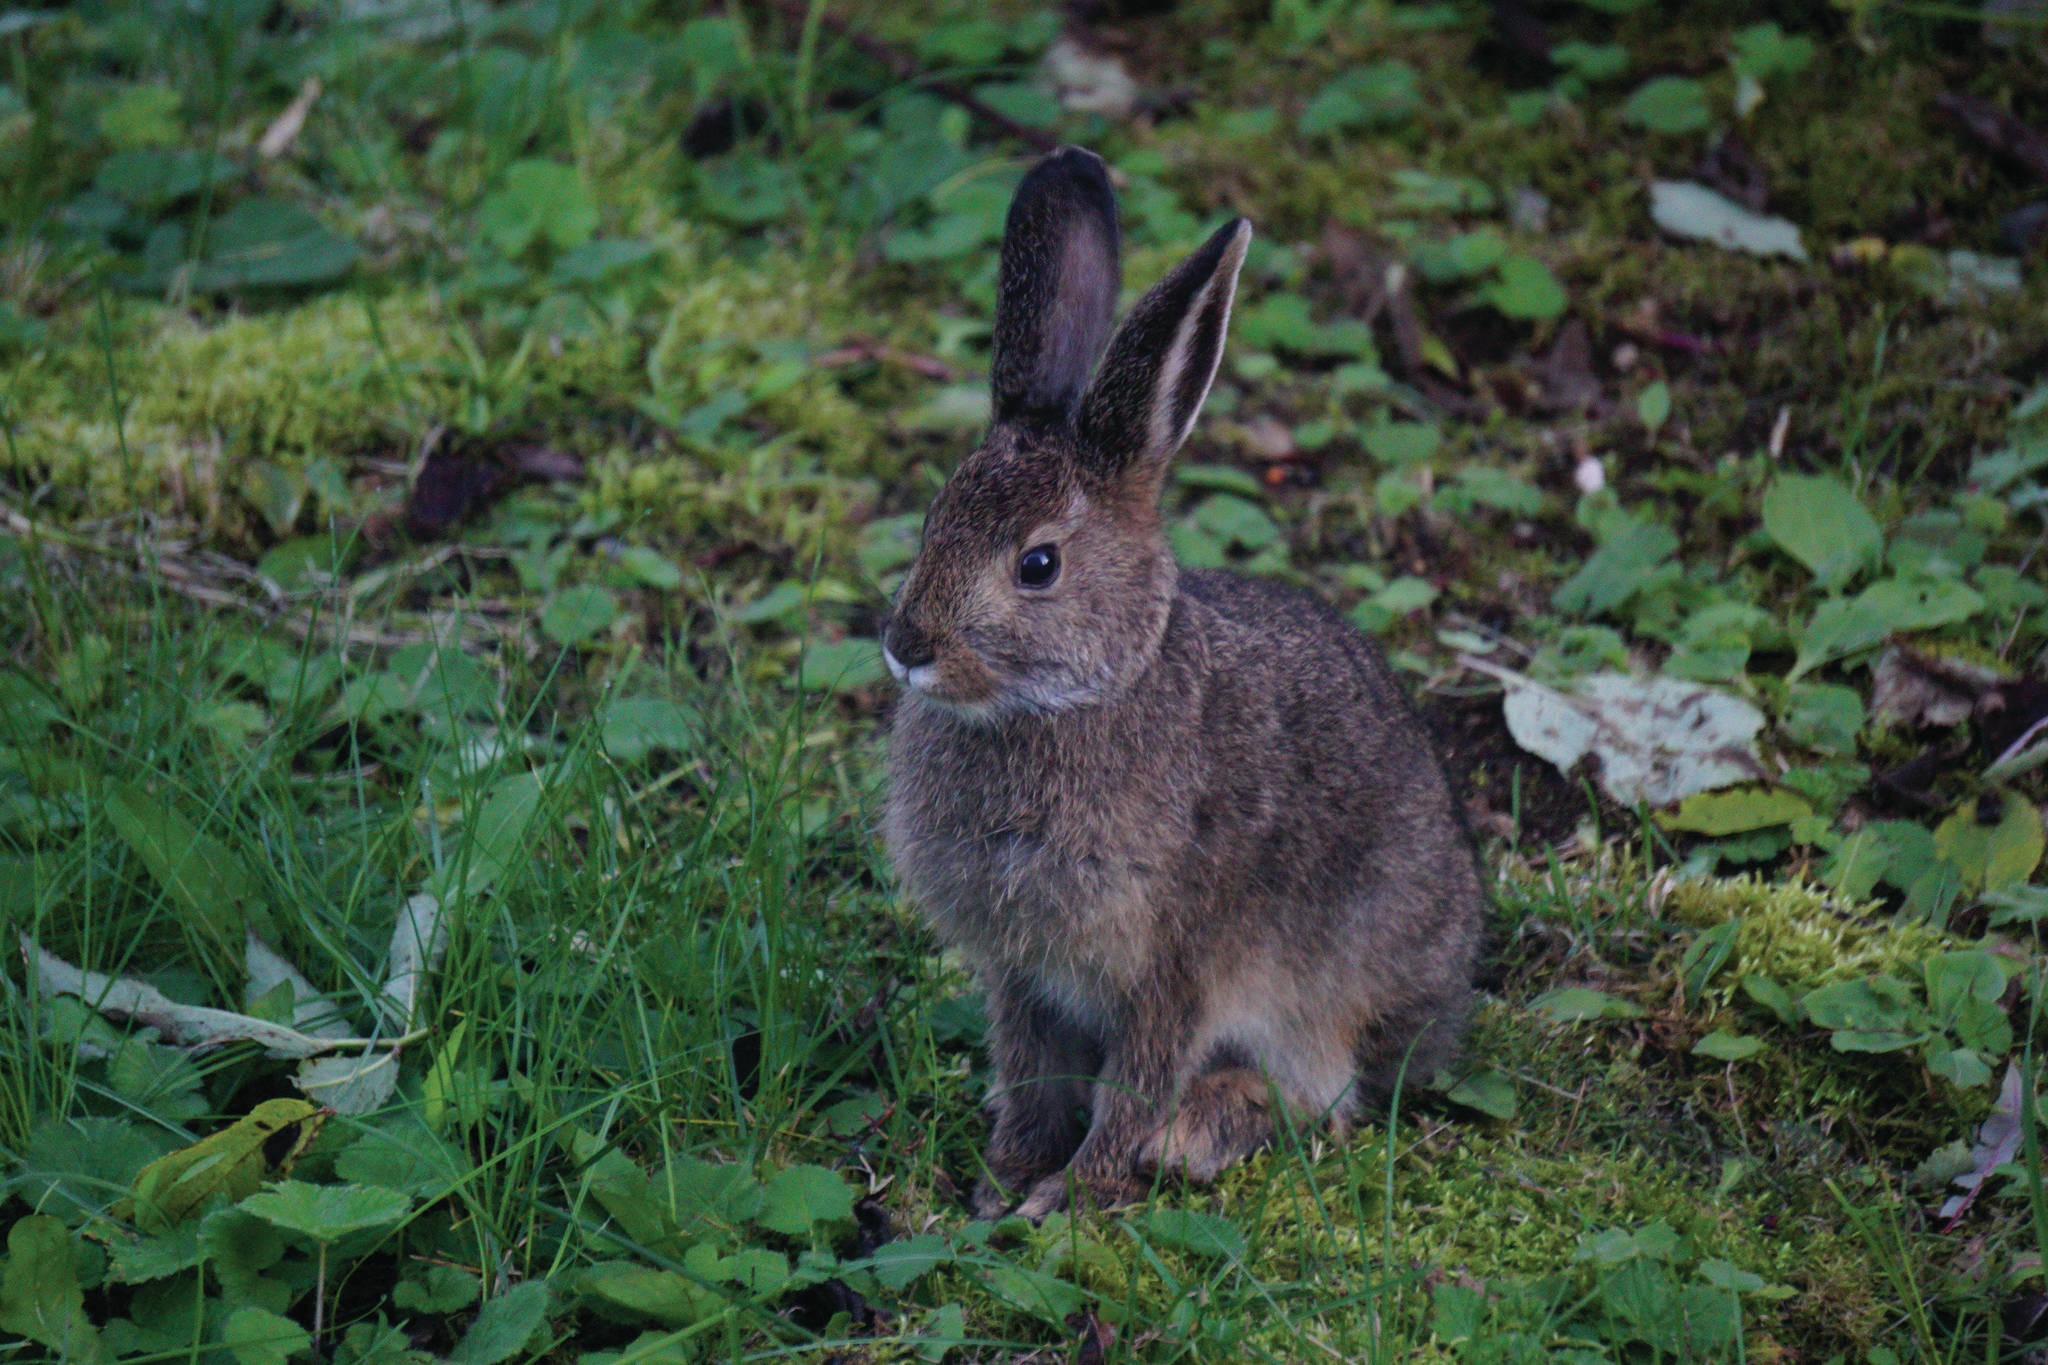 A snowshoe hare forages on Friday. Sept. 4, 2020, on Diamond Ridge near Homer, Alaska. The hare is still in its summer coat, but will turn white for the winter. (Photo by Michael Armstrong/Homer News)